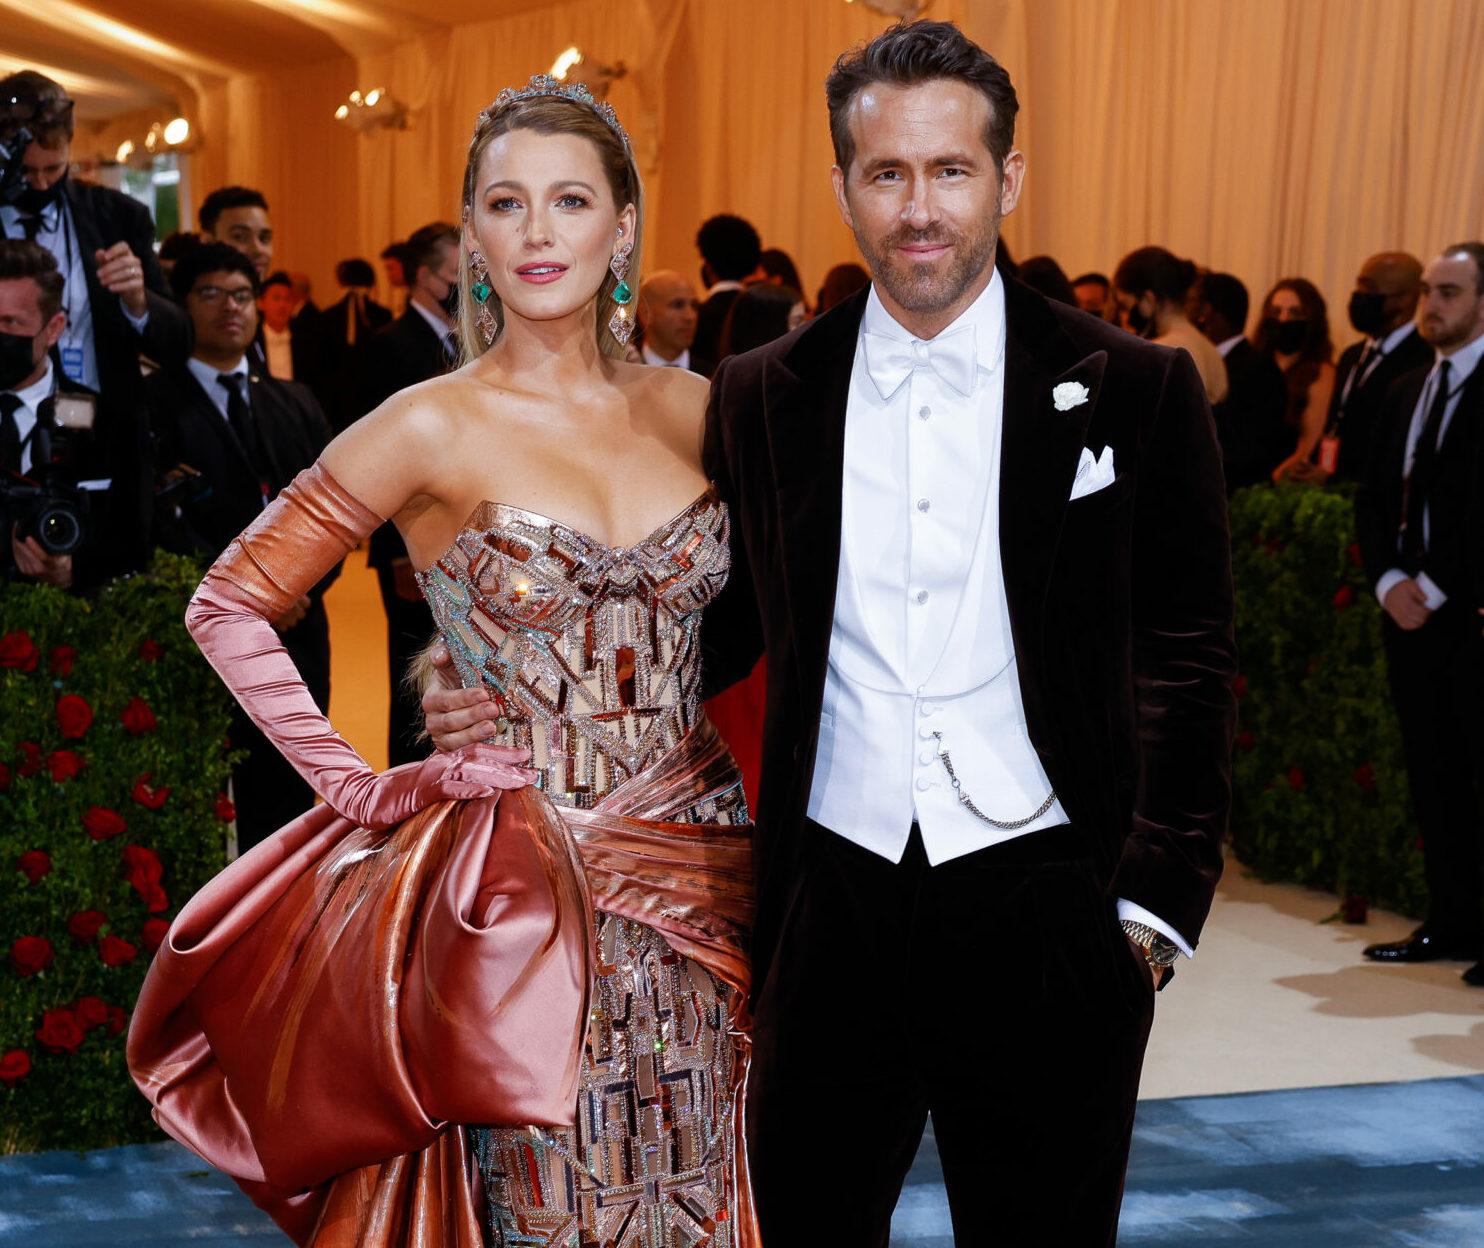 Blake Lively and Ryan Reynolds arrive on the red carpet for The Met Gala at The Metropolitan Museum of Art celebrating the Costume Institute opening of "In America: An Anthology of Fashion" in New York City on Monday, May 2, 2022.